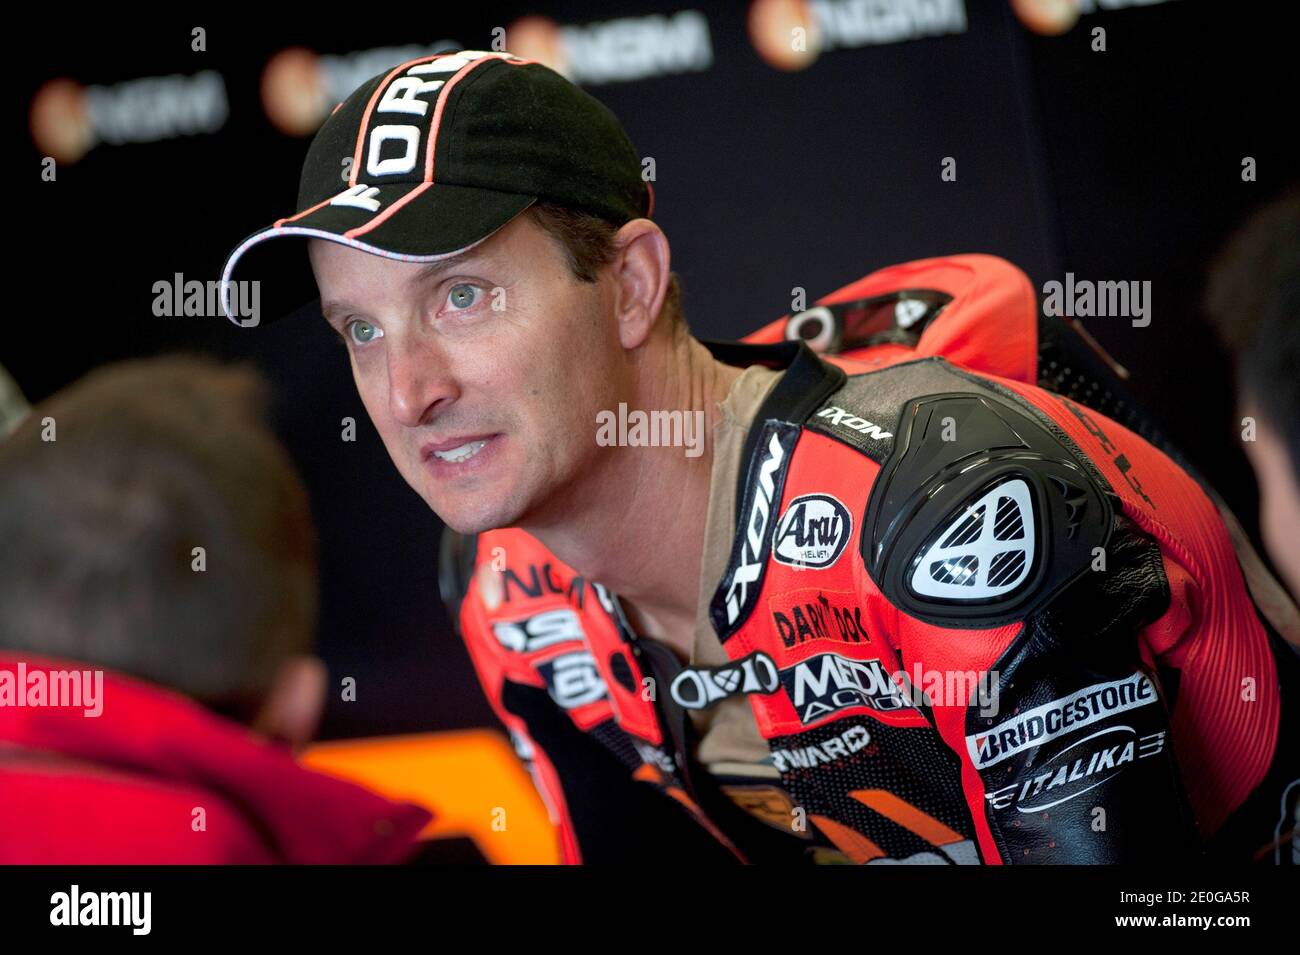 USA's MotoGP rider Colin Edwards during the MotoGP Great Britain Grand Prix in Silverstone, UK on June 17, 2012. Photo by Malkon/ABACAPRESS.COM Stock Photo